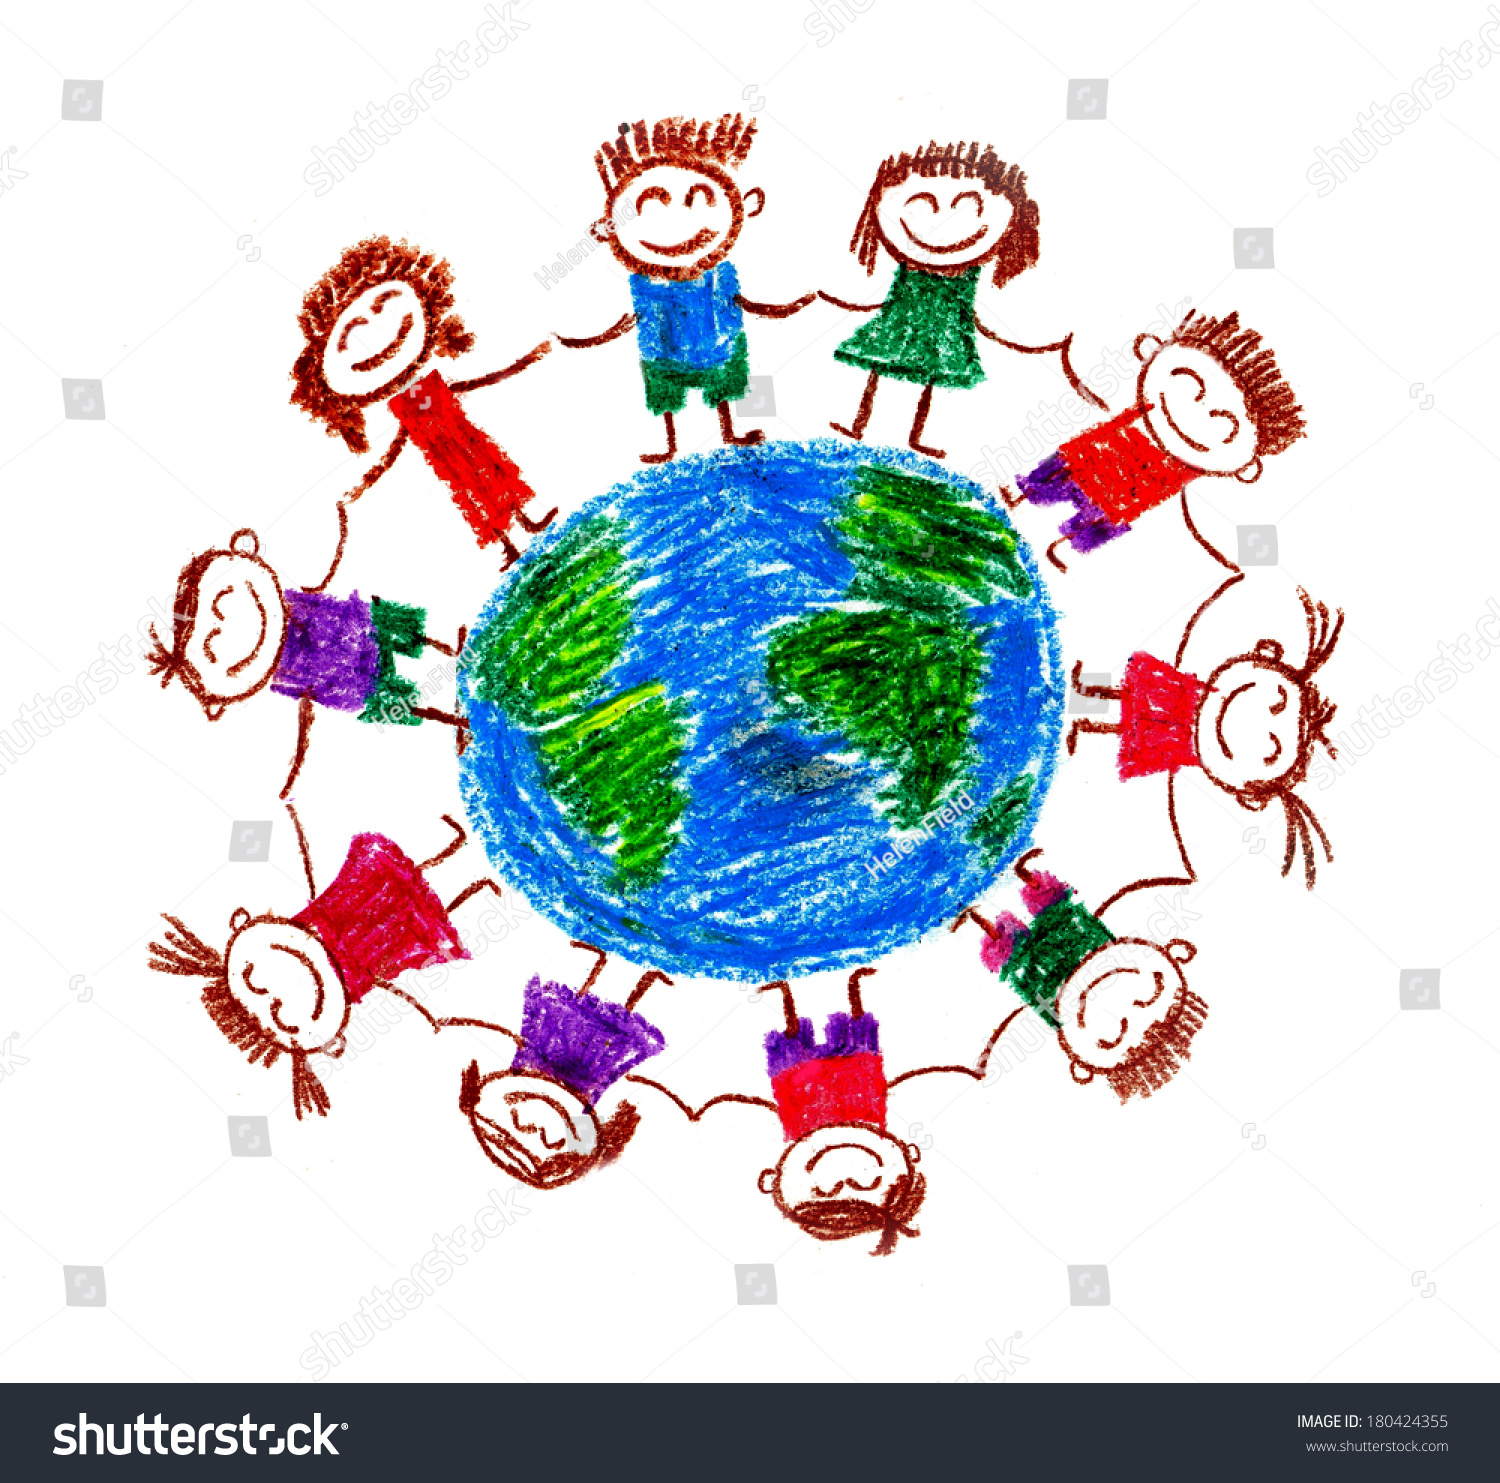 Featured image of post World Peace Drawing For Kids Children s drawings on the theme of peace in the world